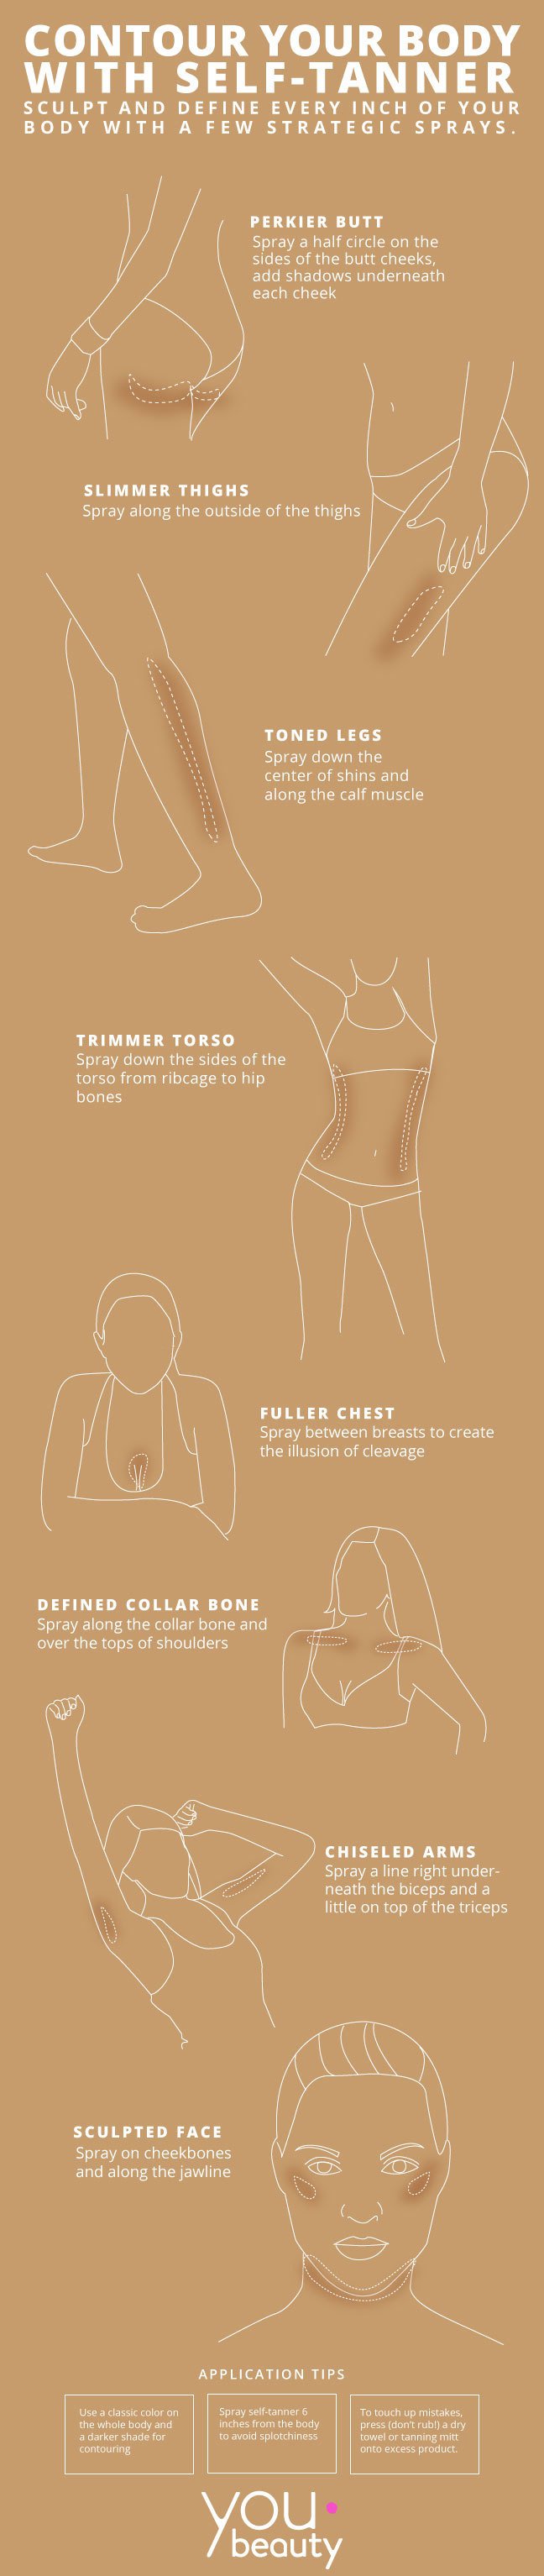 How to Contour Your Body With Self-Tanner